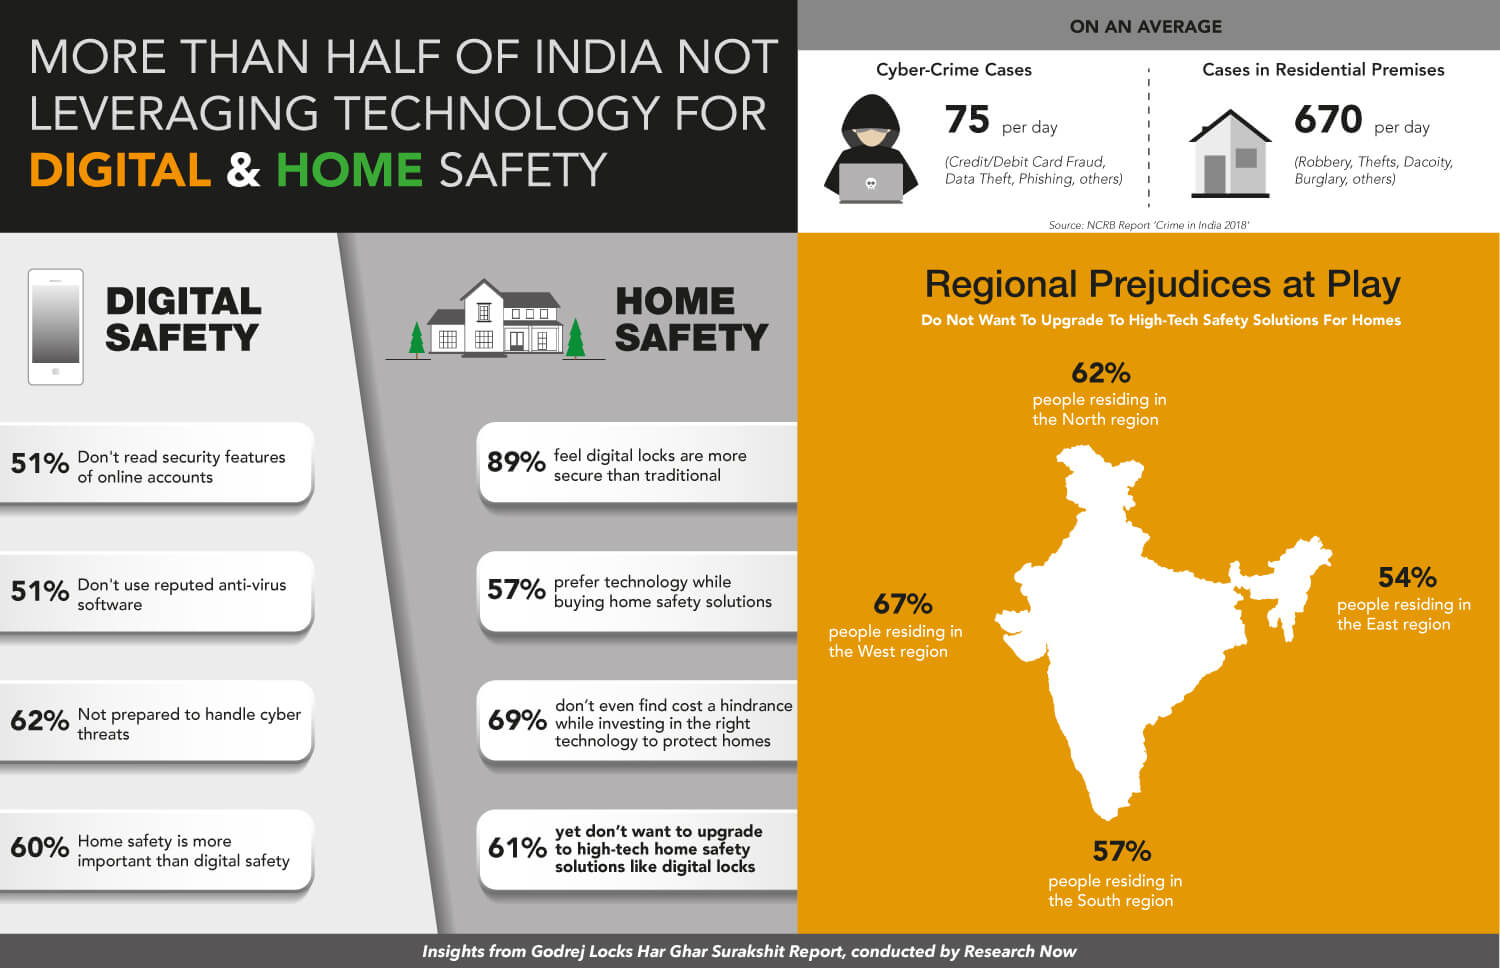 More Than Half of Indians Not Leveraging Technology for Home and Digital Safety decoding=